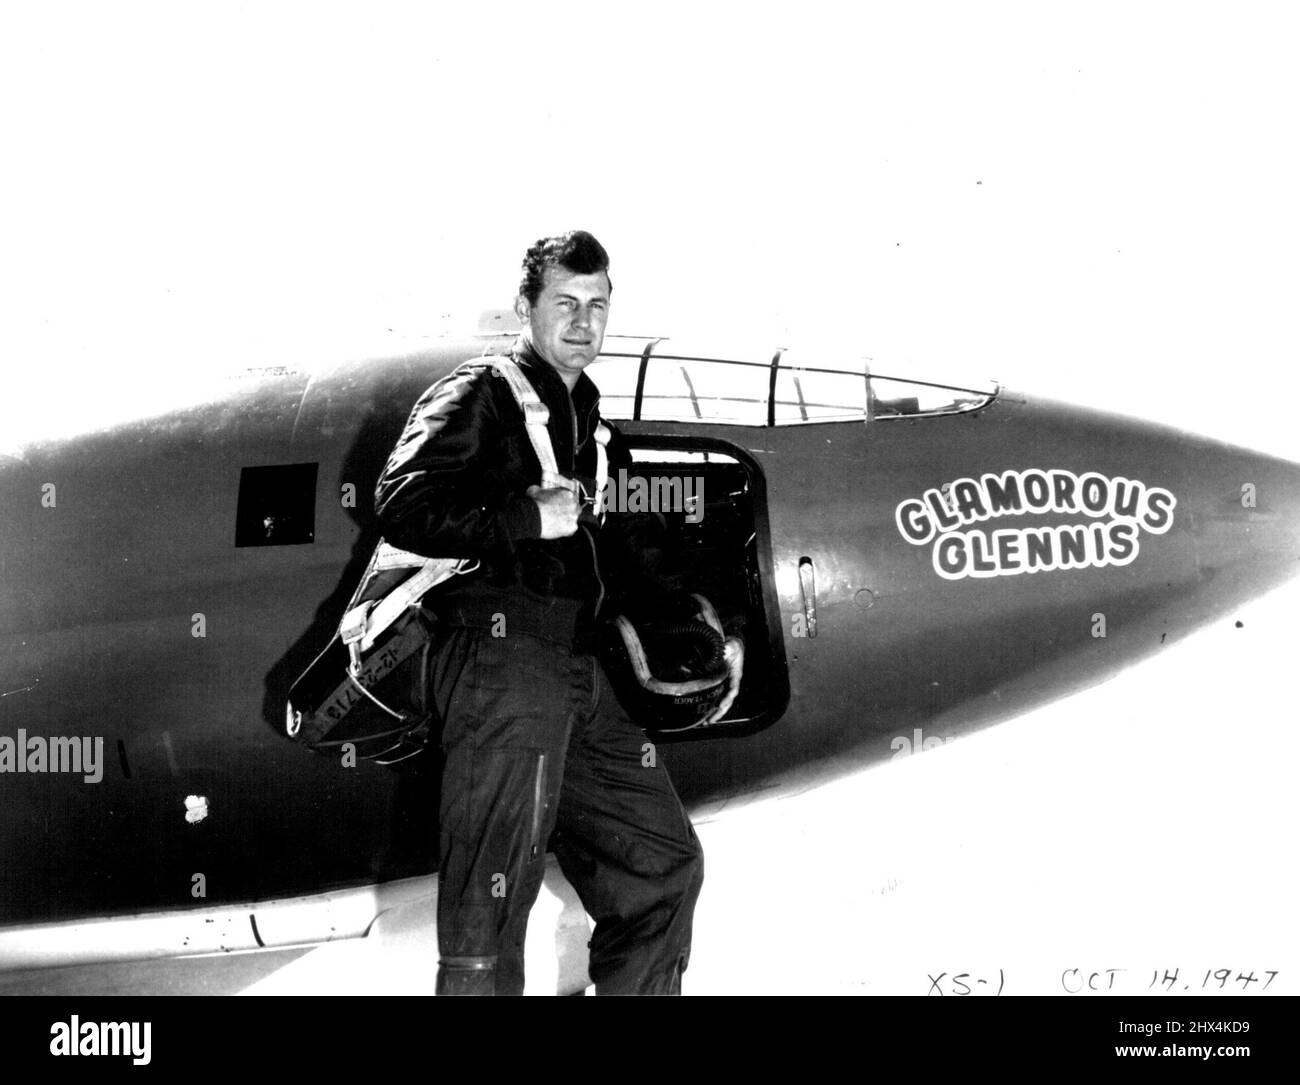 First man to break the sound barrier -- Chuck Yeager -- International guest of Shelleys Famous Drinks at the 1983 schofields air show. October 14, 1947. Stock Photo